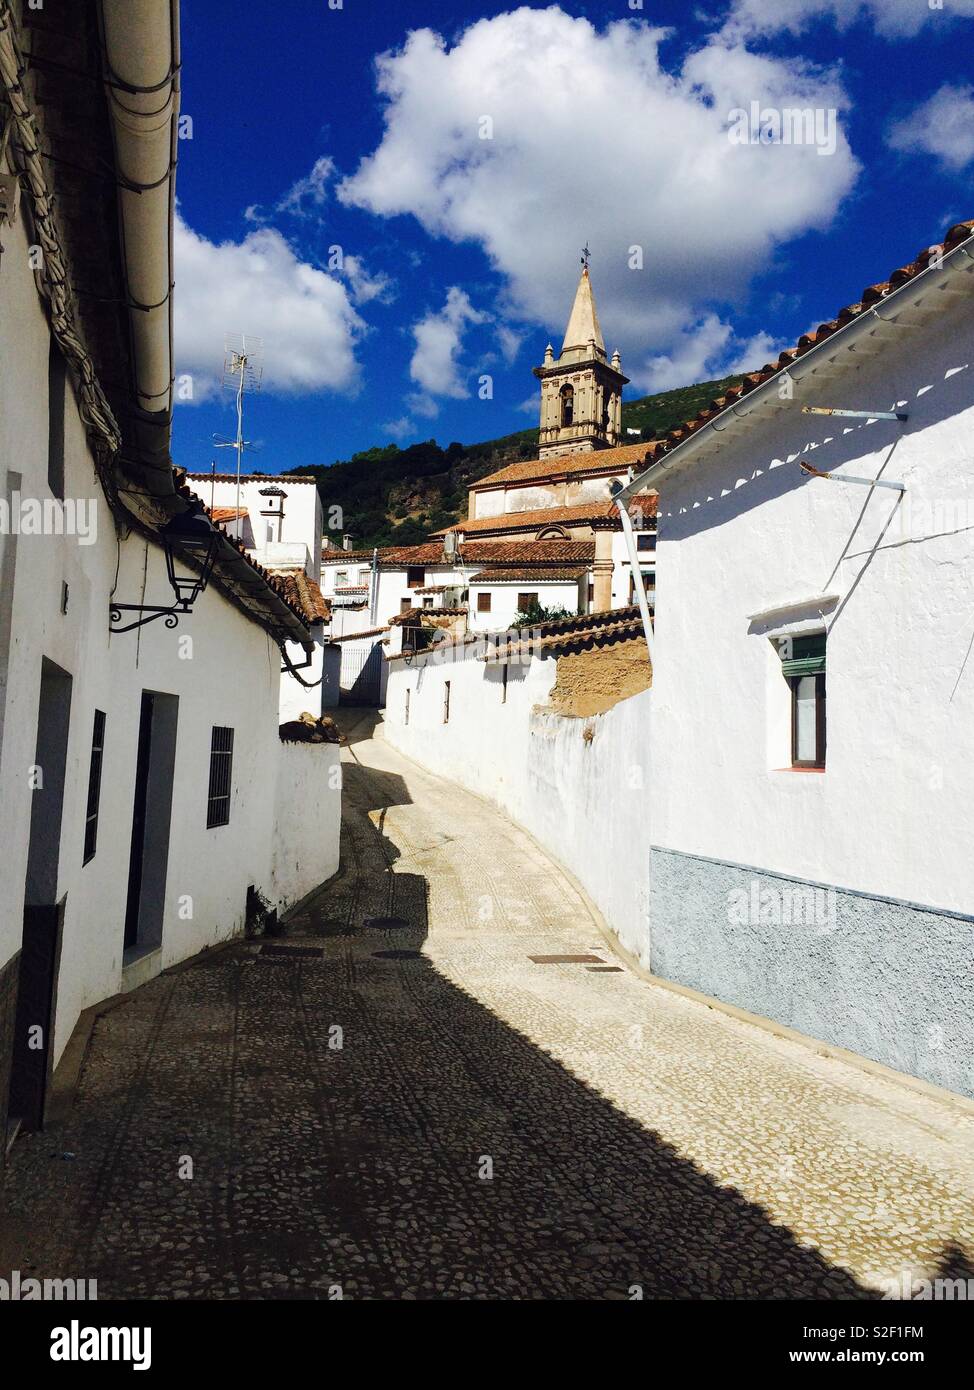 Looking up a narrow lane or street in a village in Andalucia Spain through the old white houses and church at the top of the hill Stock Photo